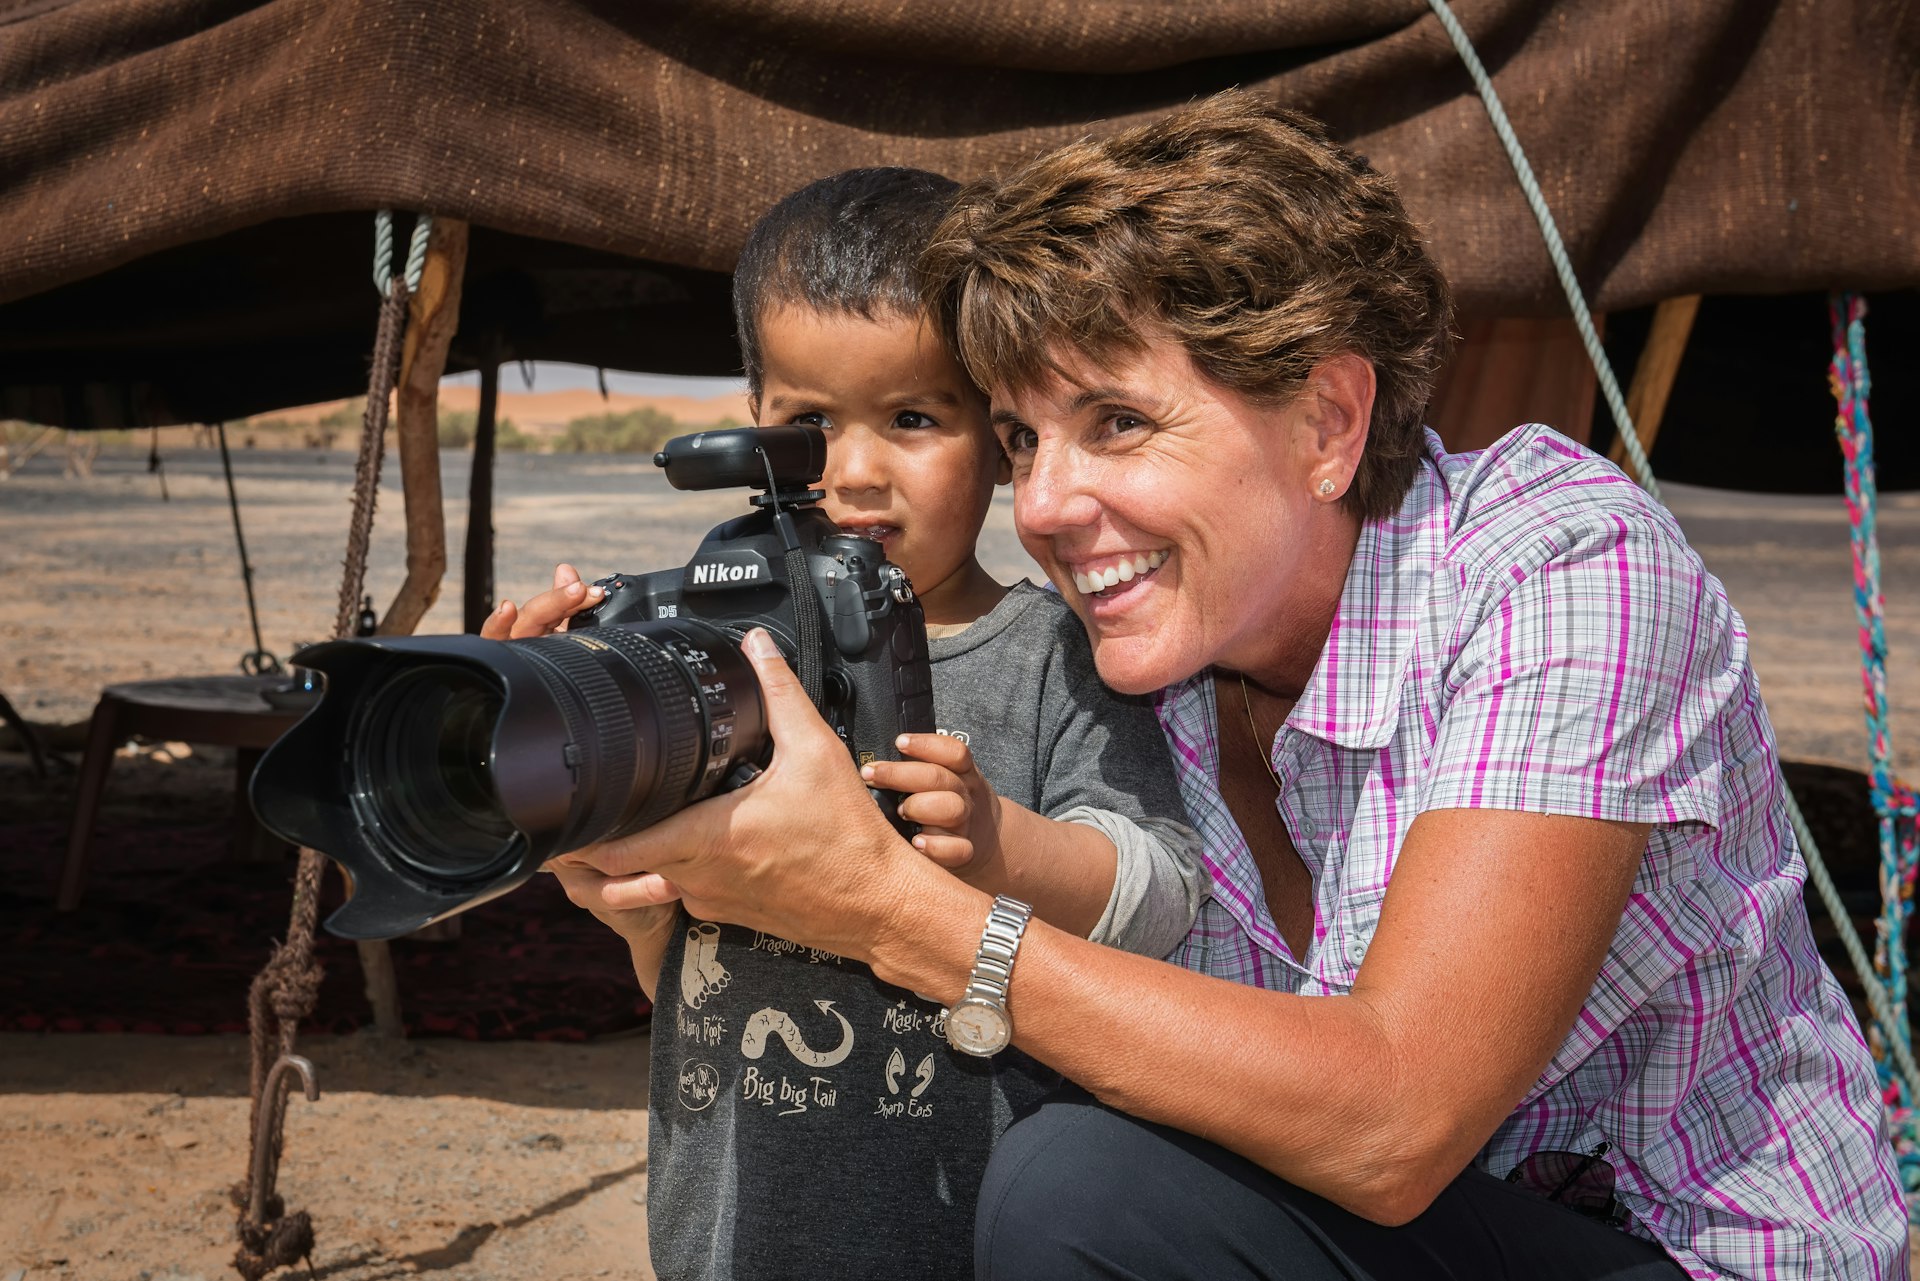 A woman shows a young child how to operate a camera. They're in a desert area with a canopy behind them propped up on sticks